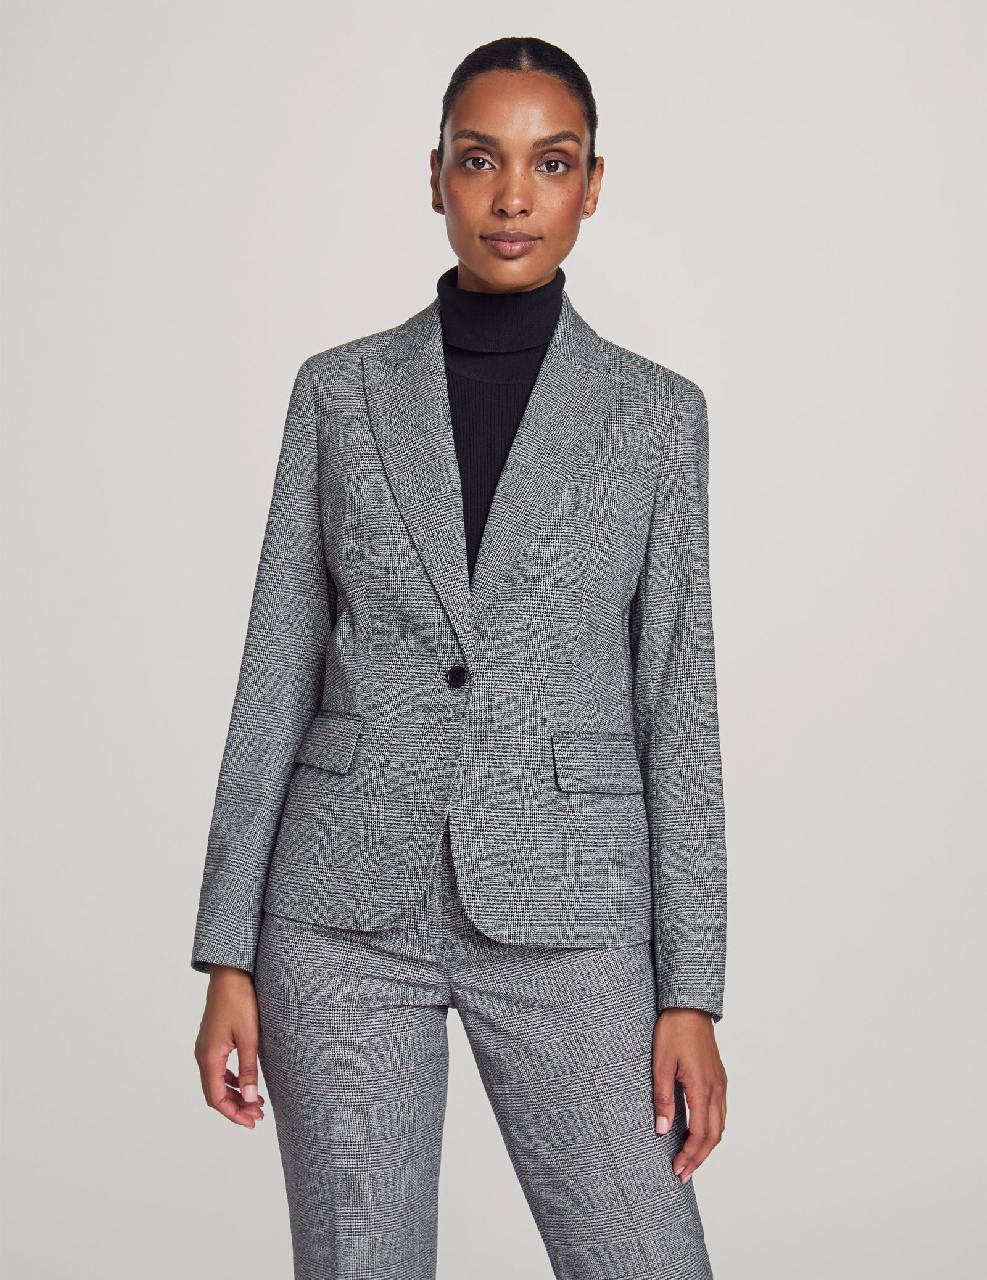 Anne Klein  Executive Collection Plaid Jacket and Bowie Pant